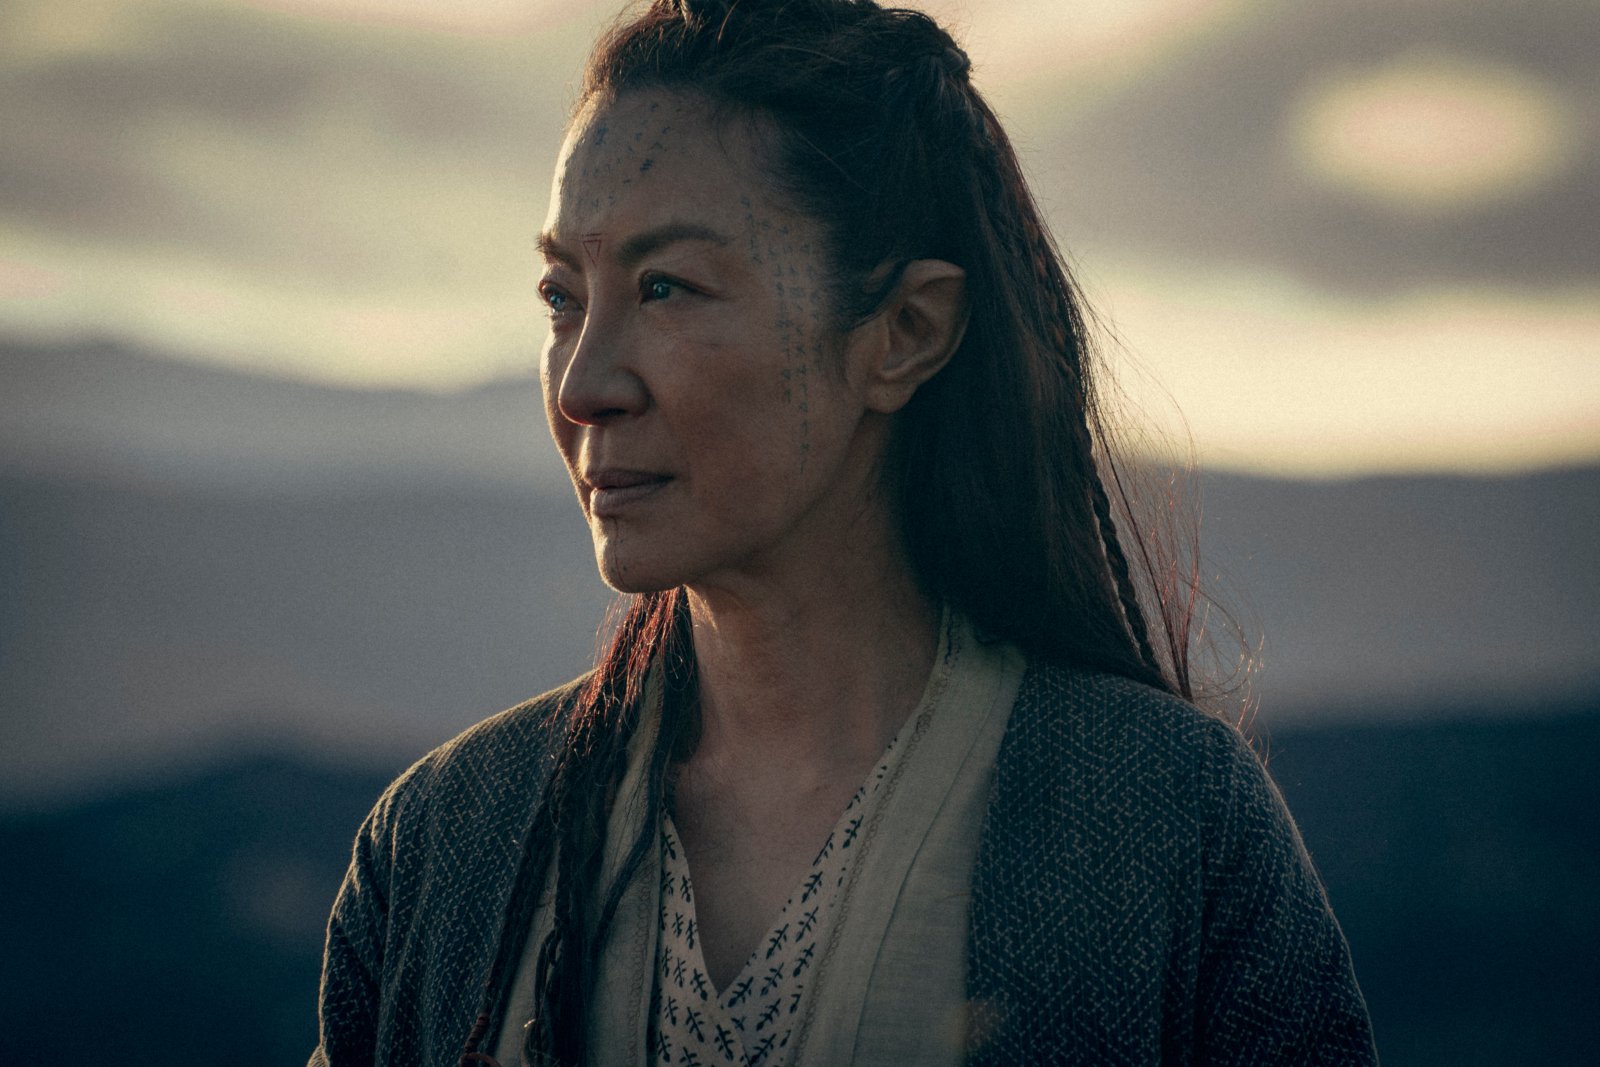 Michelle Yeoh in 'The Witcher: Blood Origin' for our article about its release date, trailer, cast, and more. She's looking at something off-screen, and the sky is cloudy behind her.